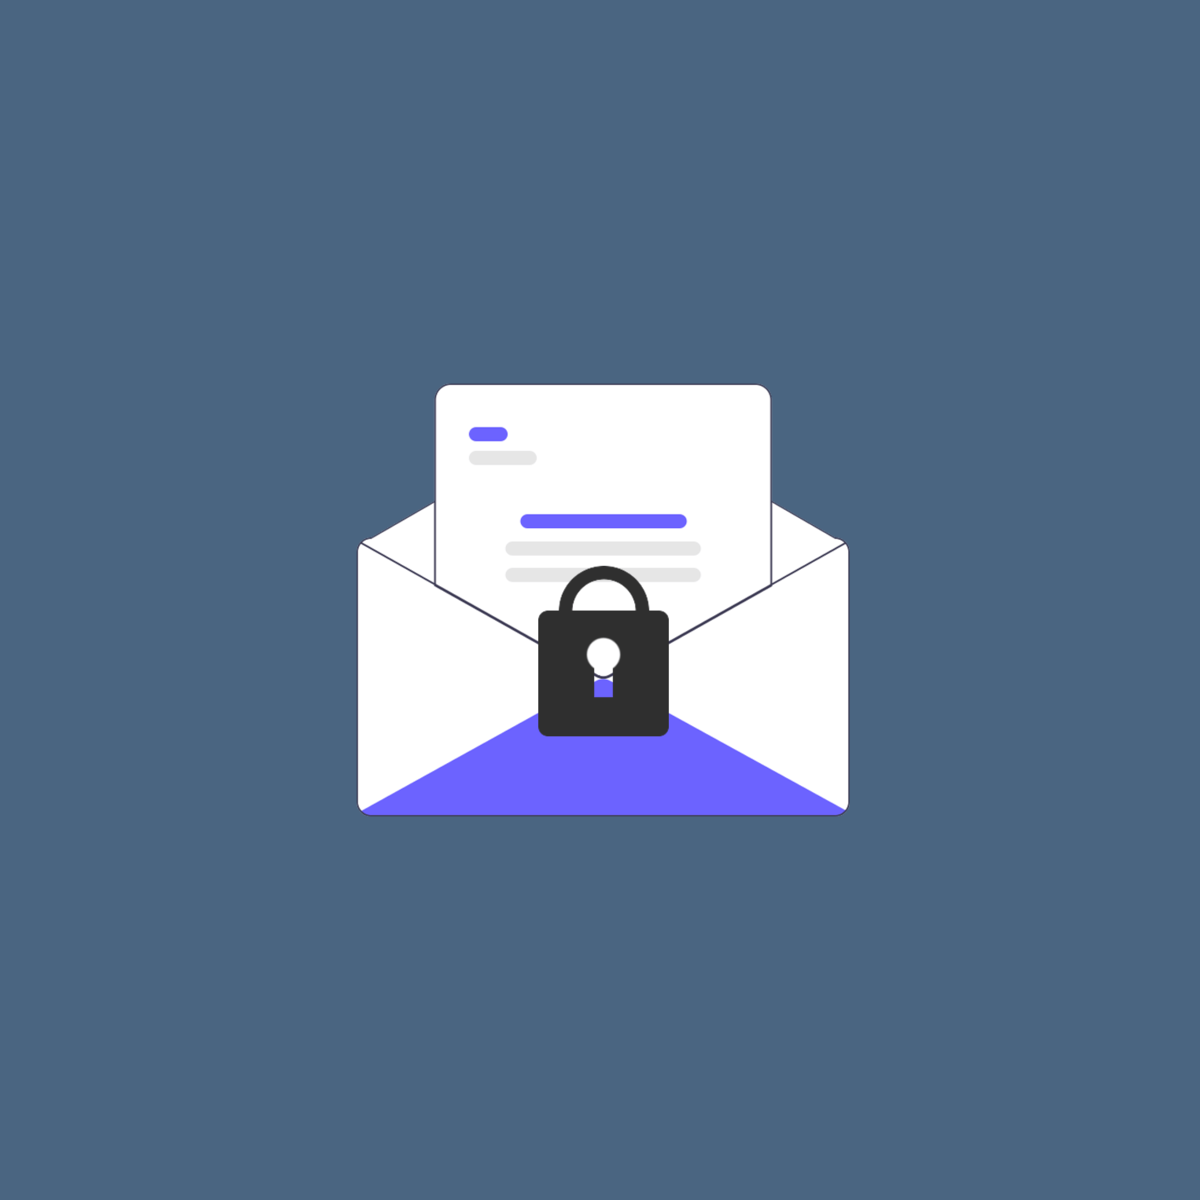 protonmail security and privacy